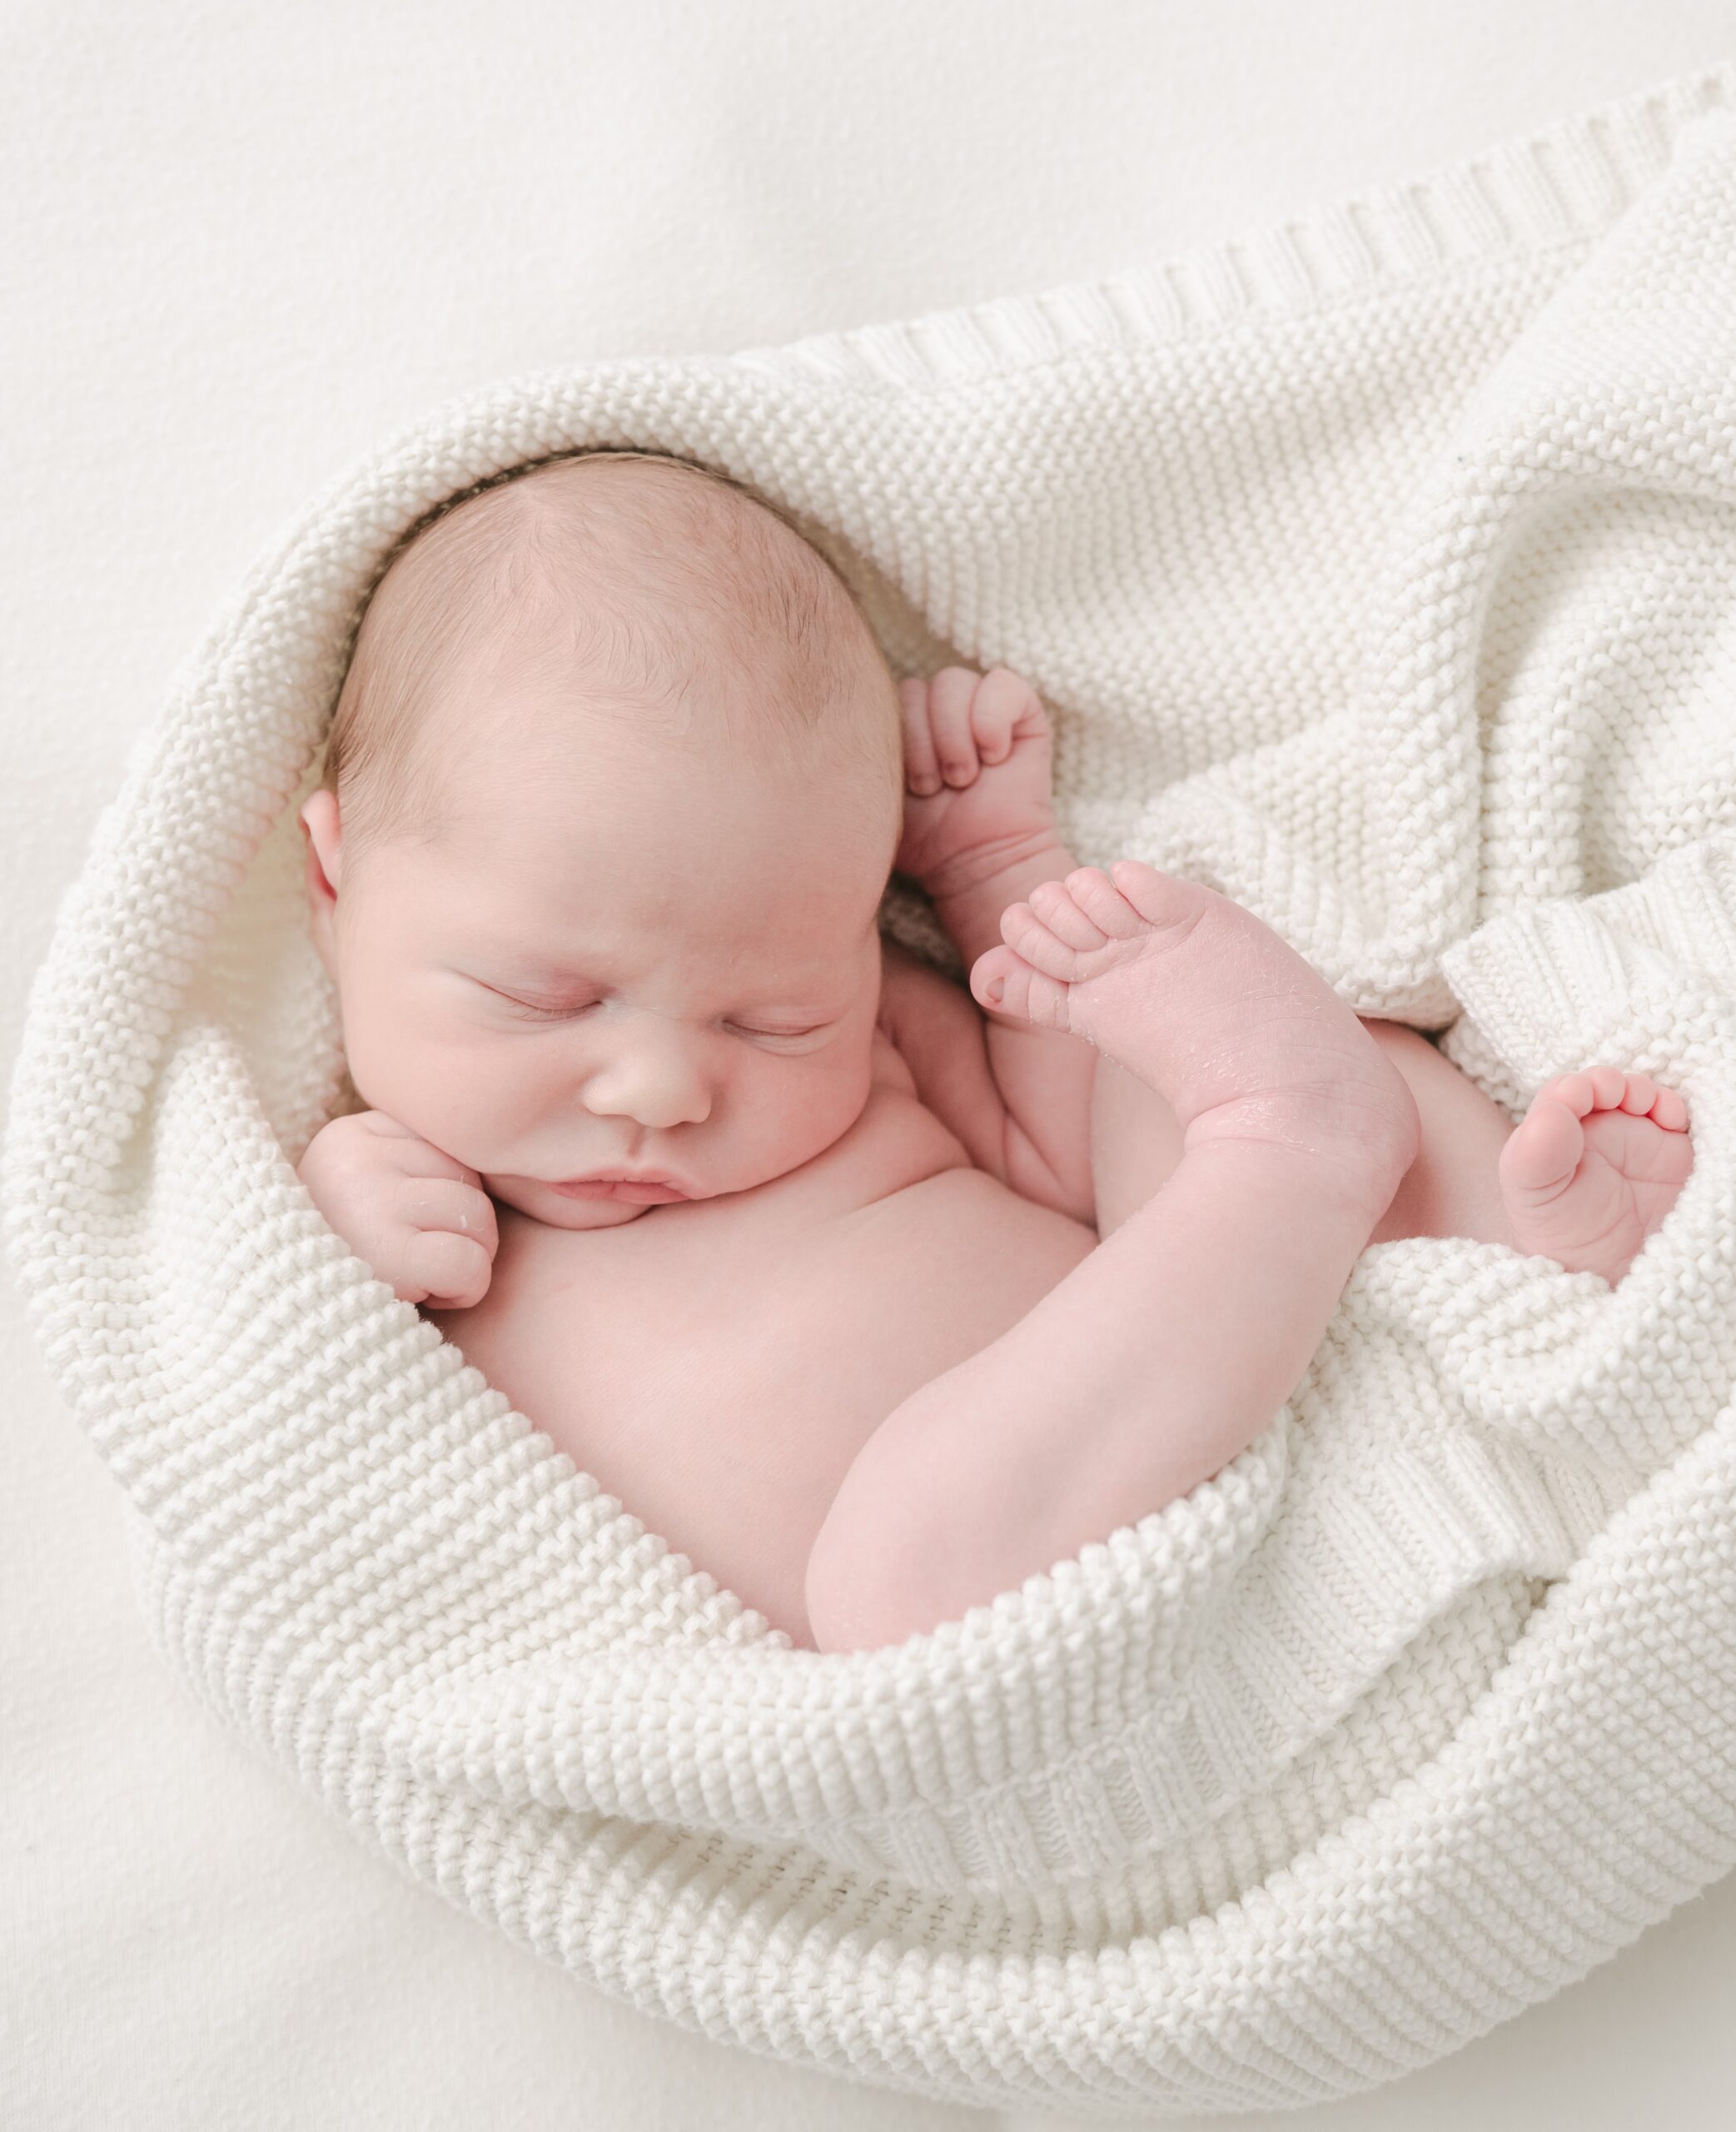 A newborn baby sleeps curled up in a white blanket birth center lancaster pa